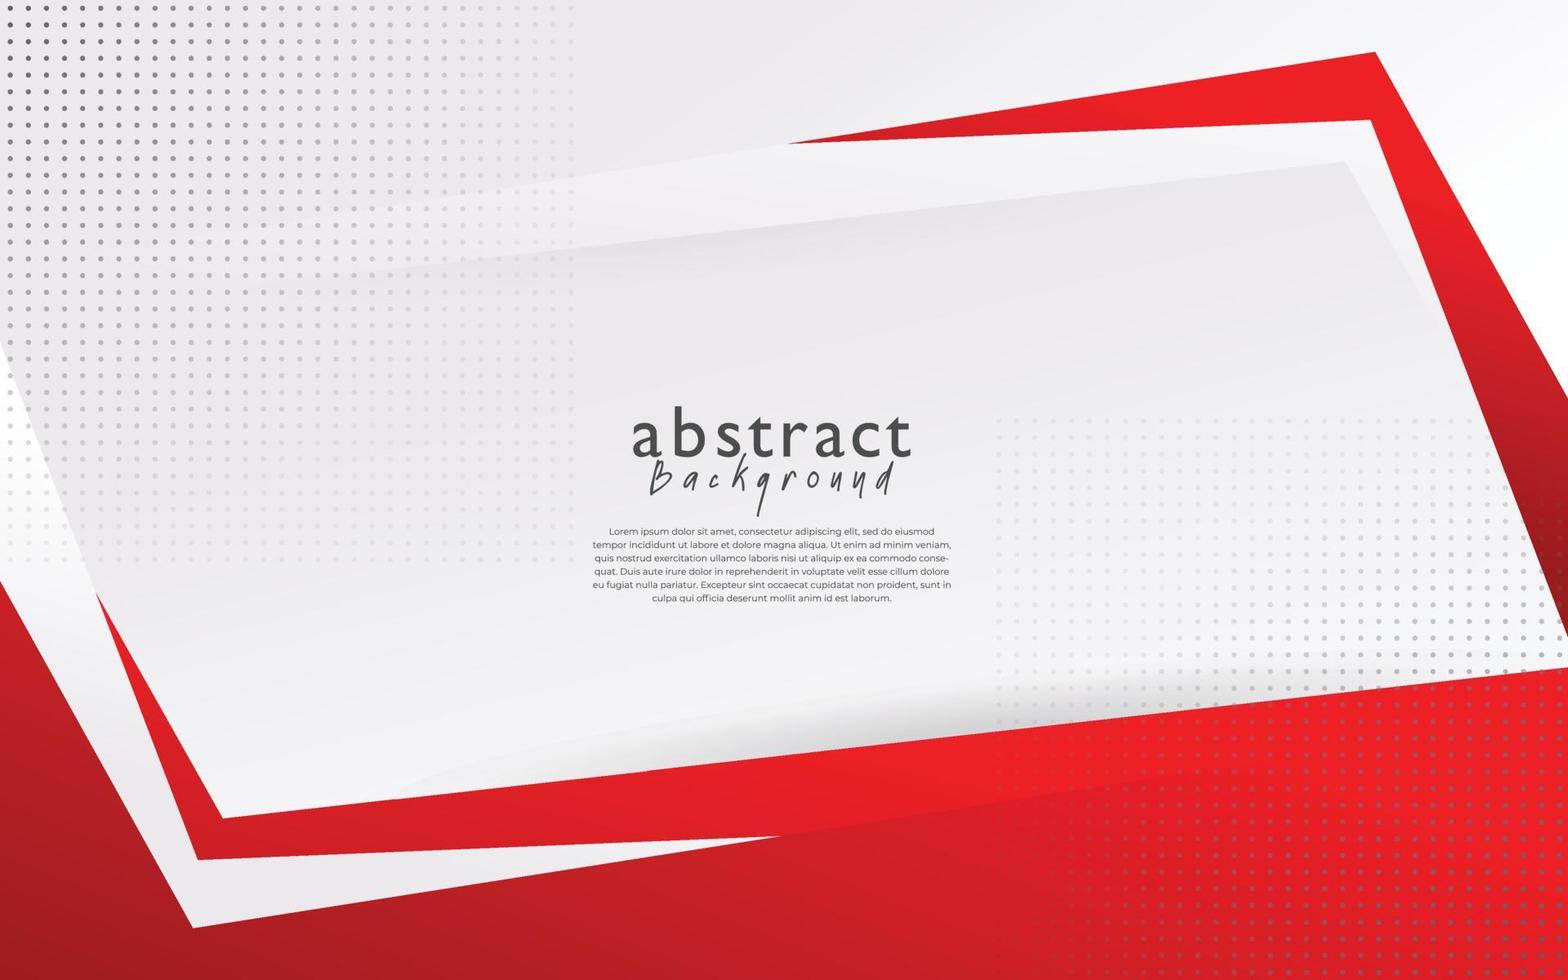 red white modern abstract background design vector